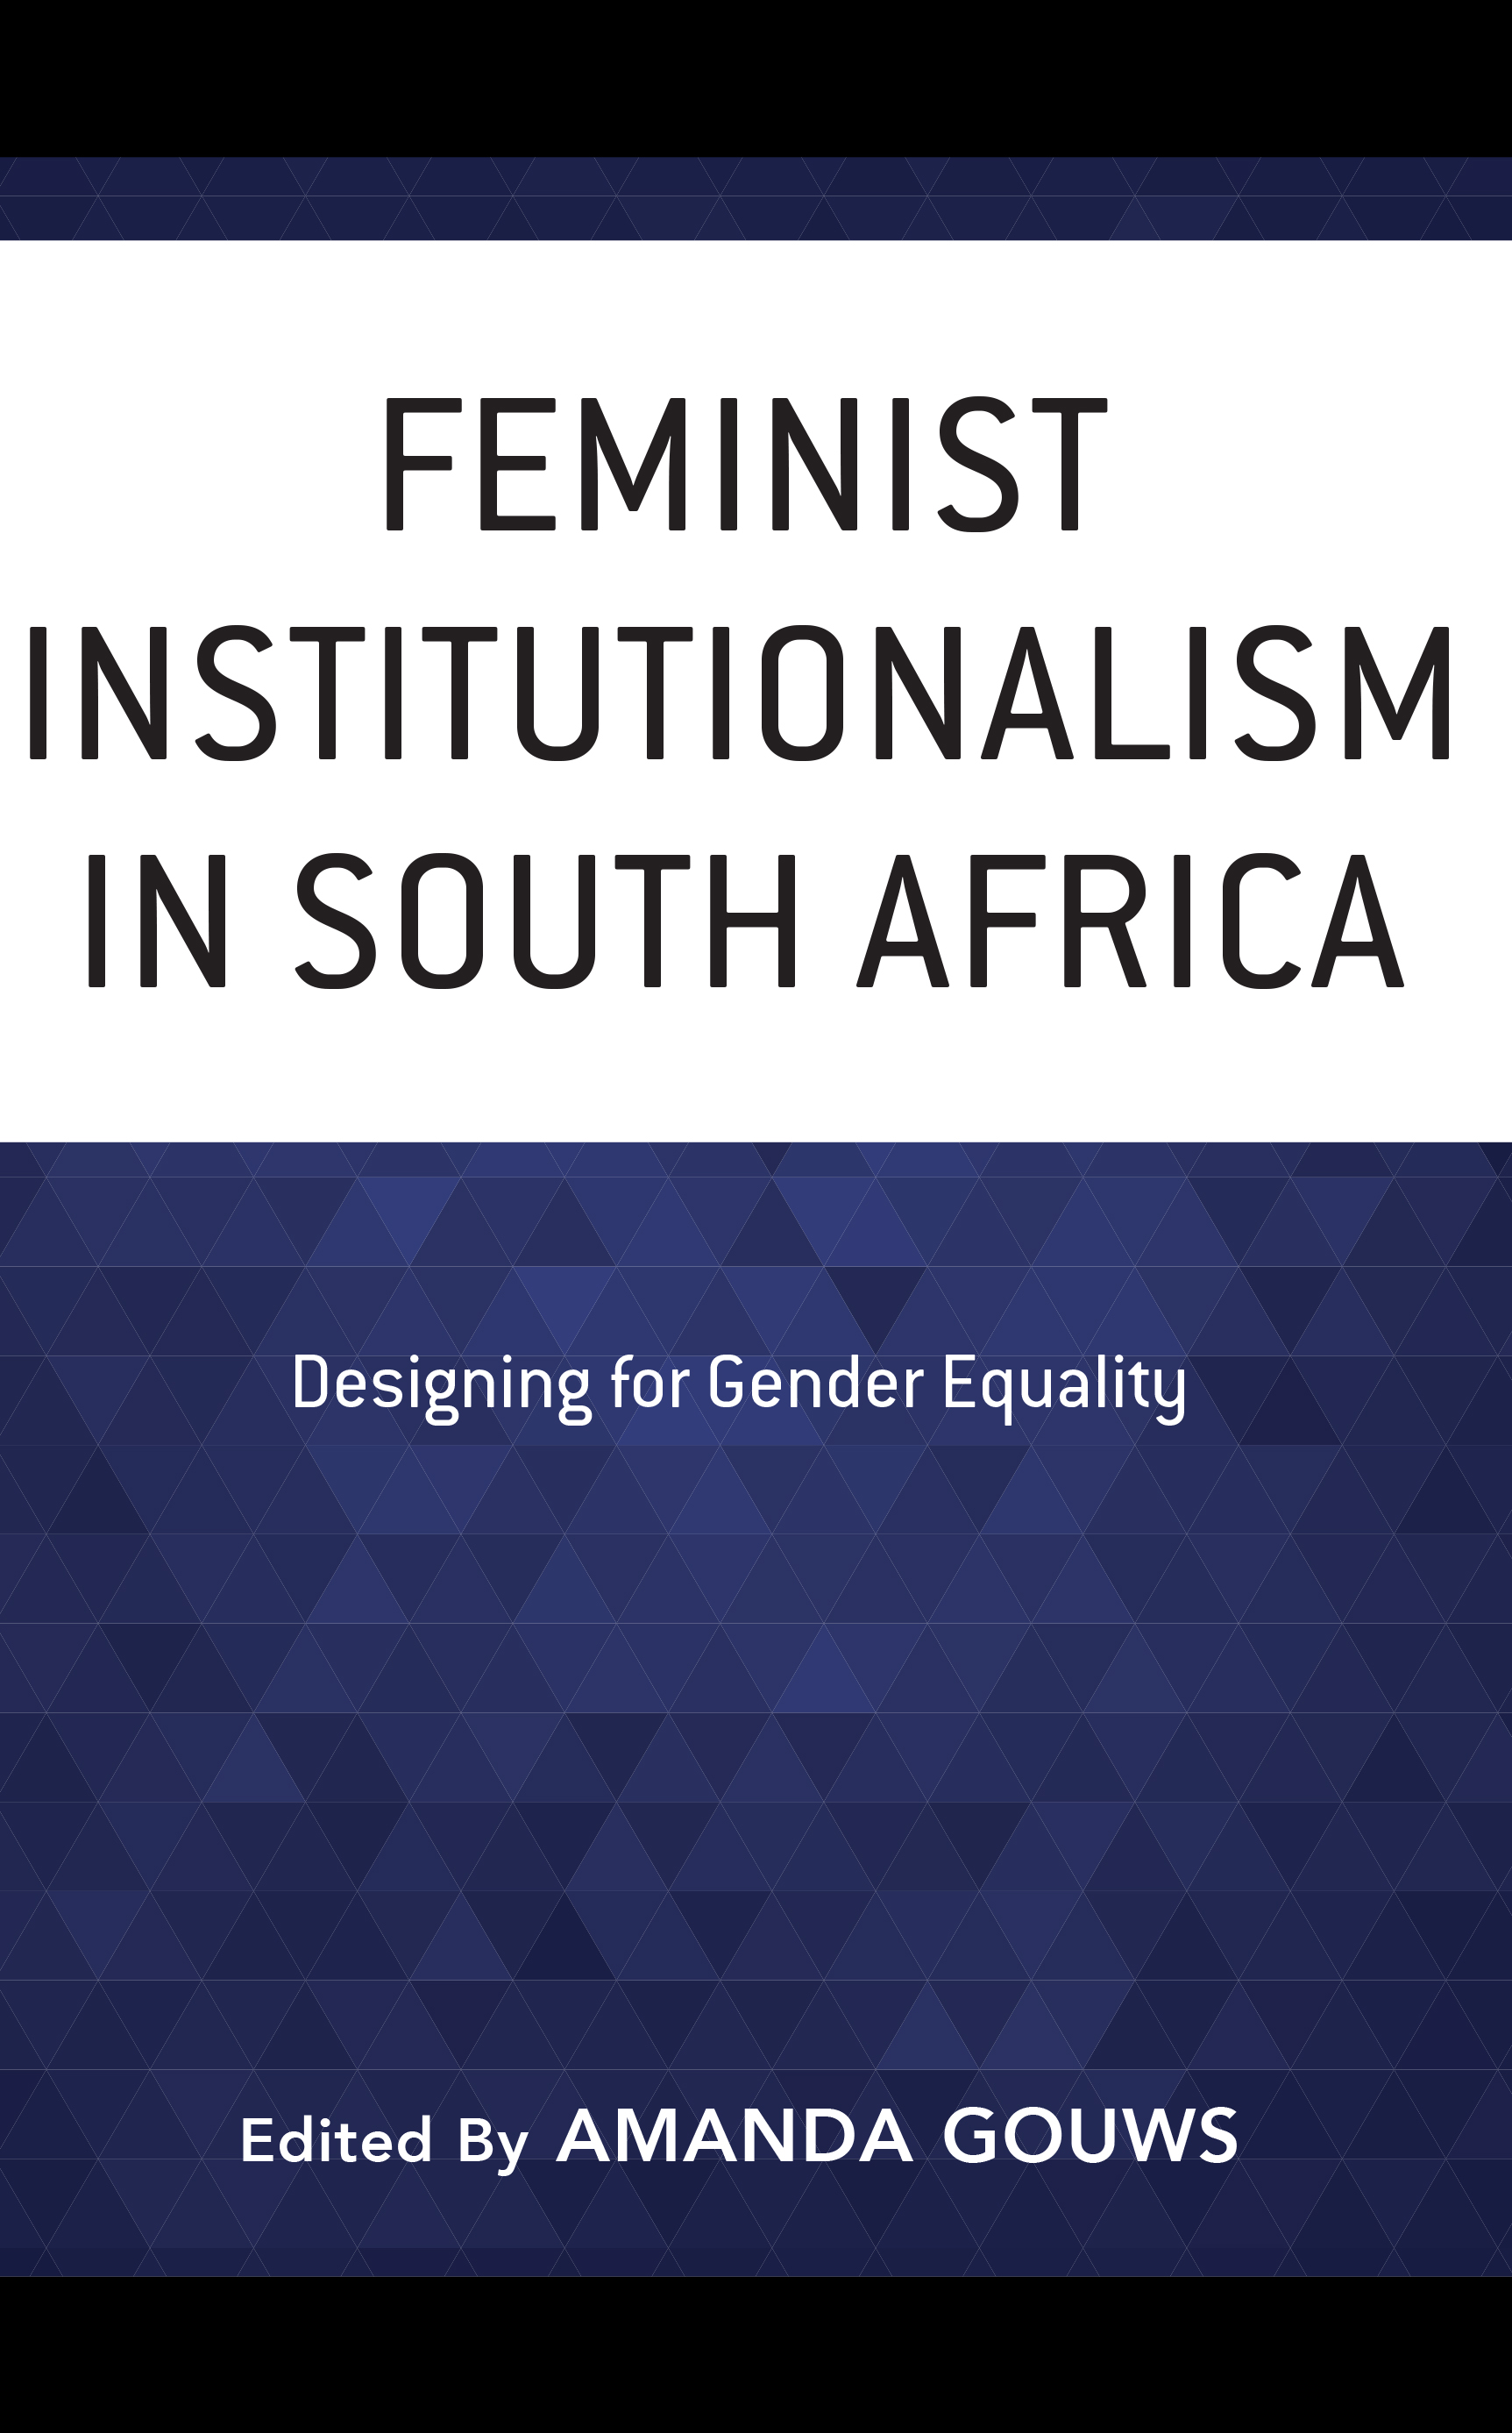 Feminist Institutionalism in South Africa: Designing for Gender Equality